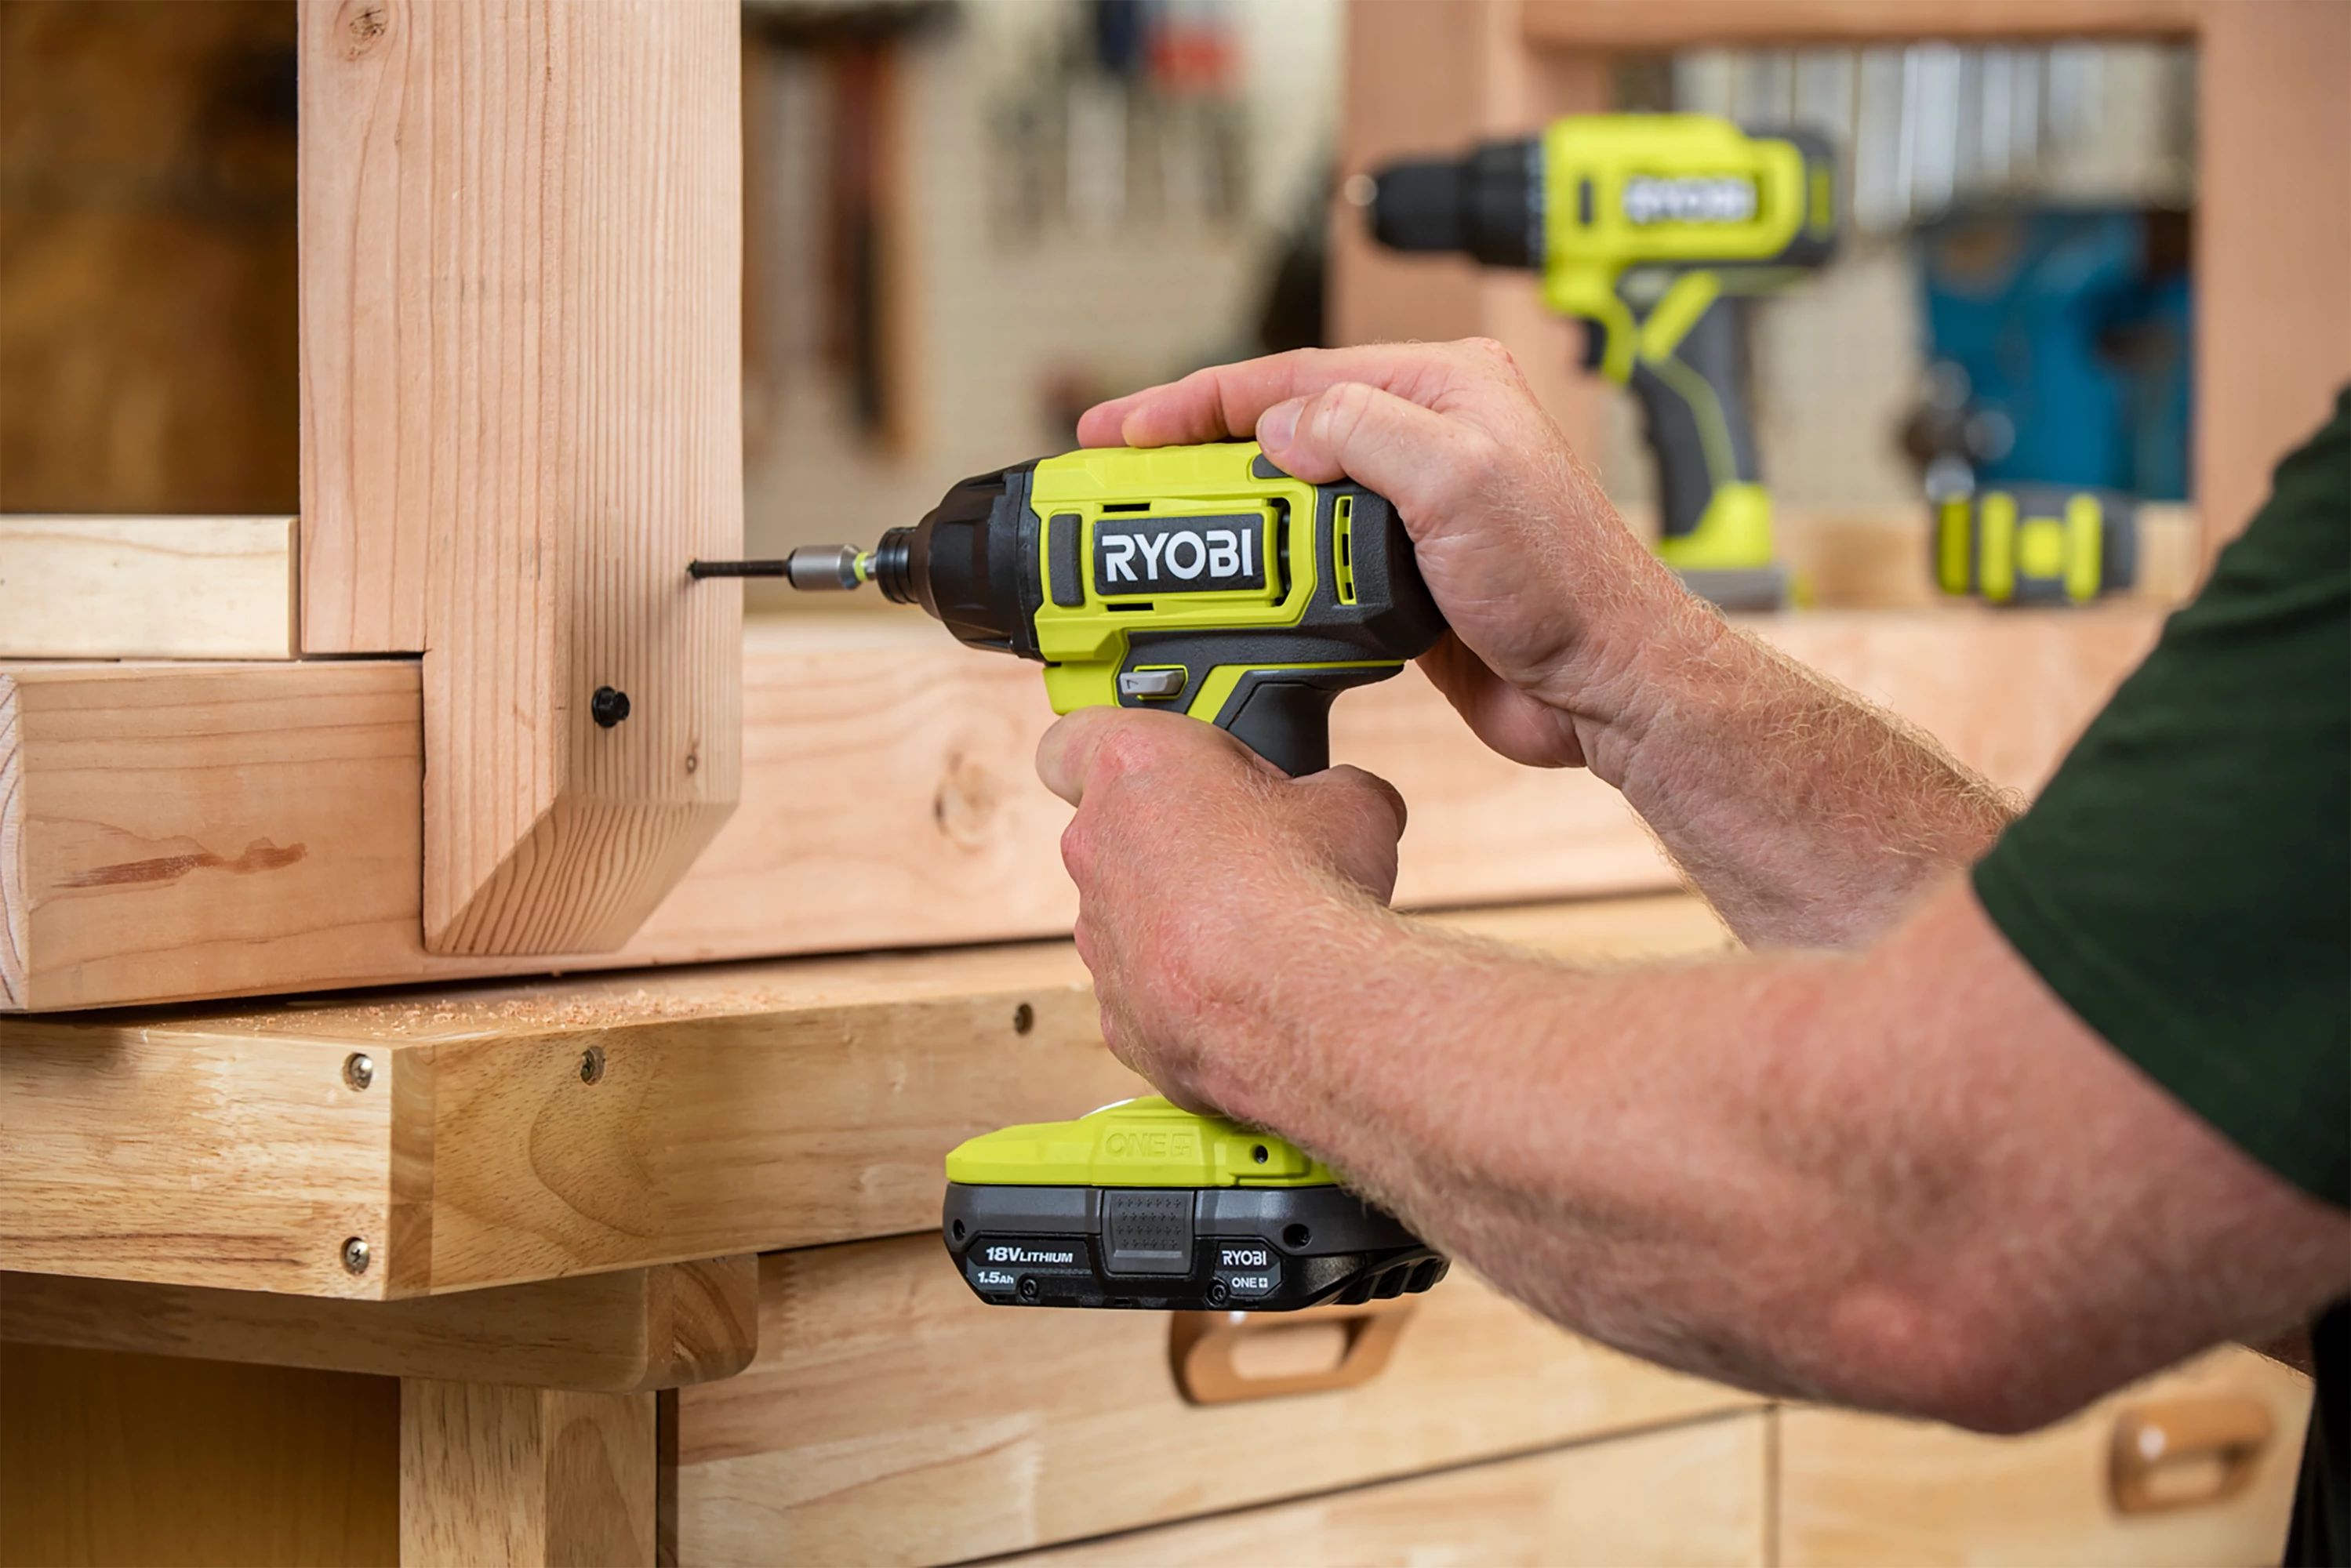 18V ONE+ 1/2-inch Drill/Driver & 1/4-inch Impact Driver Kit